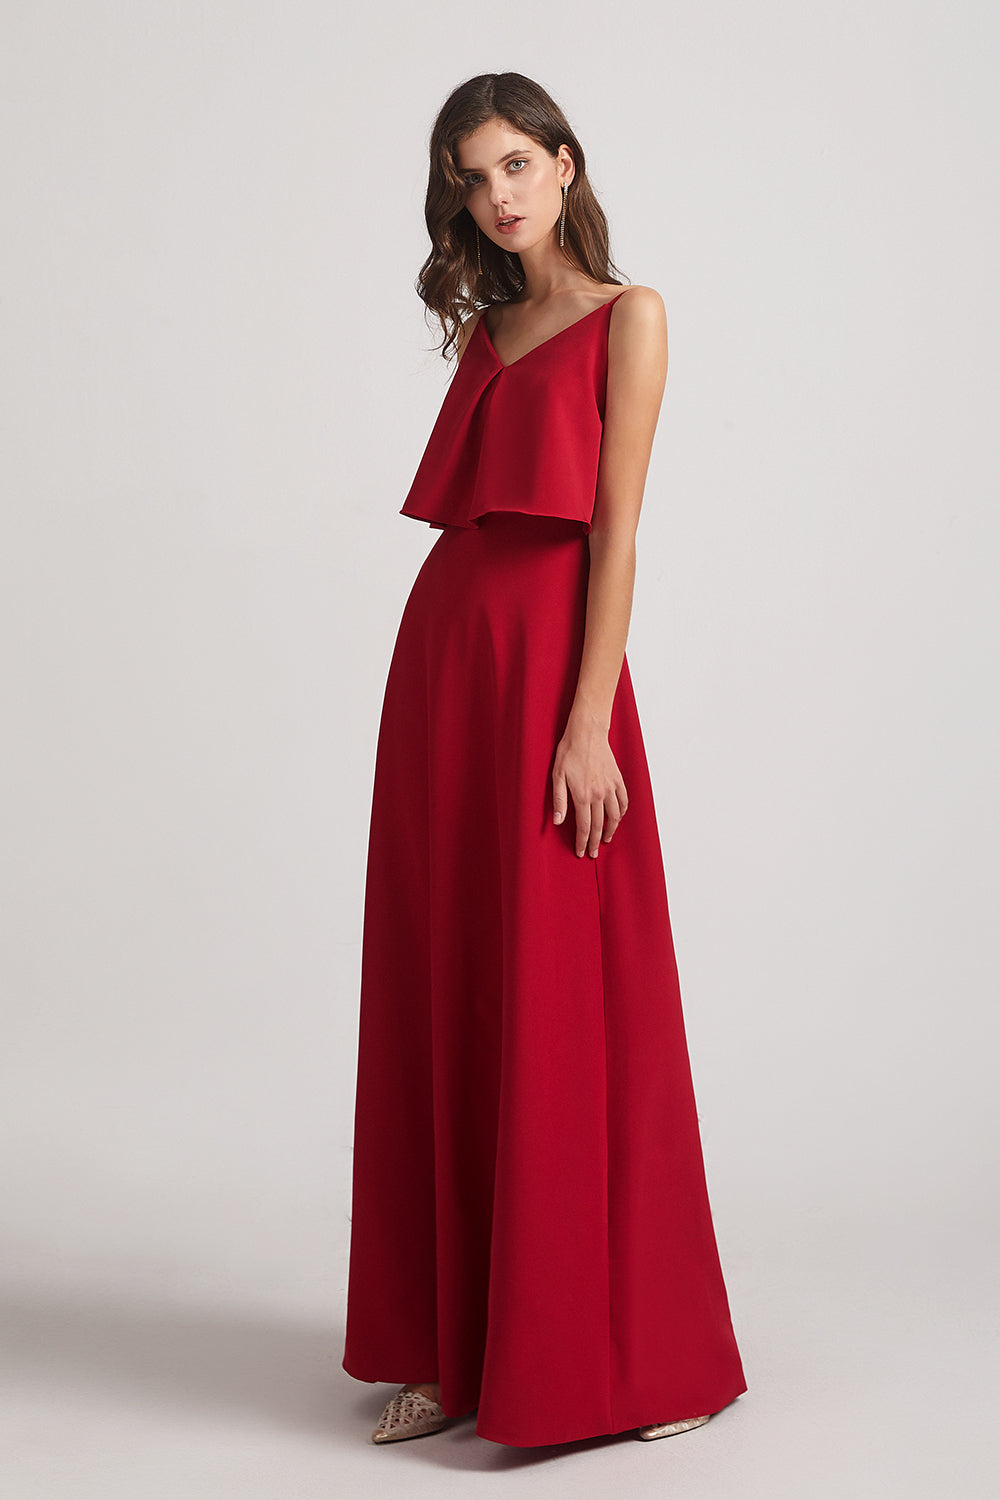 satin long red gowns